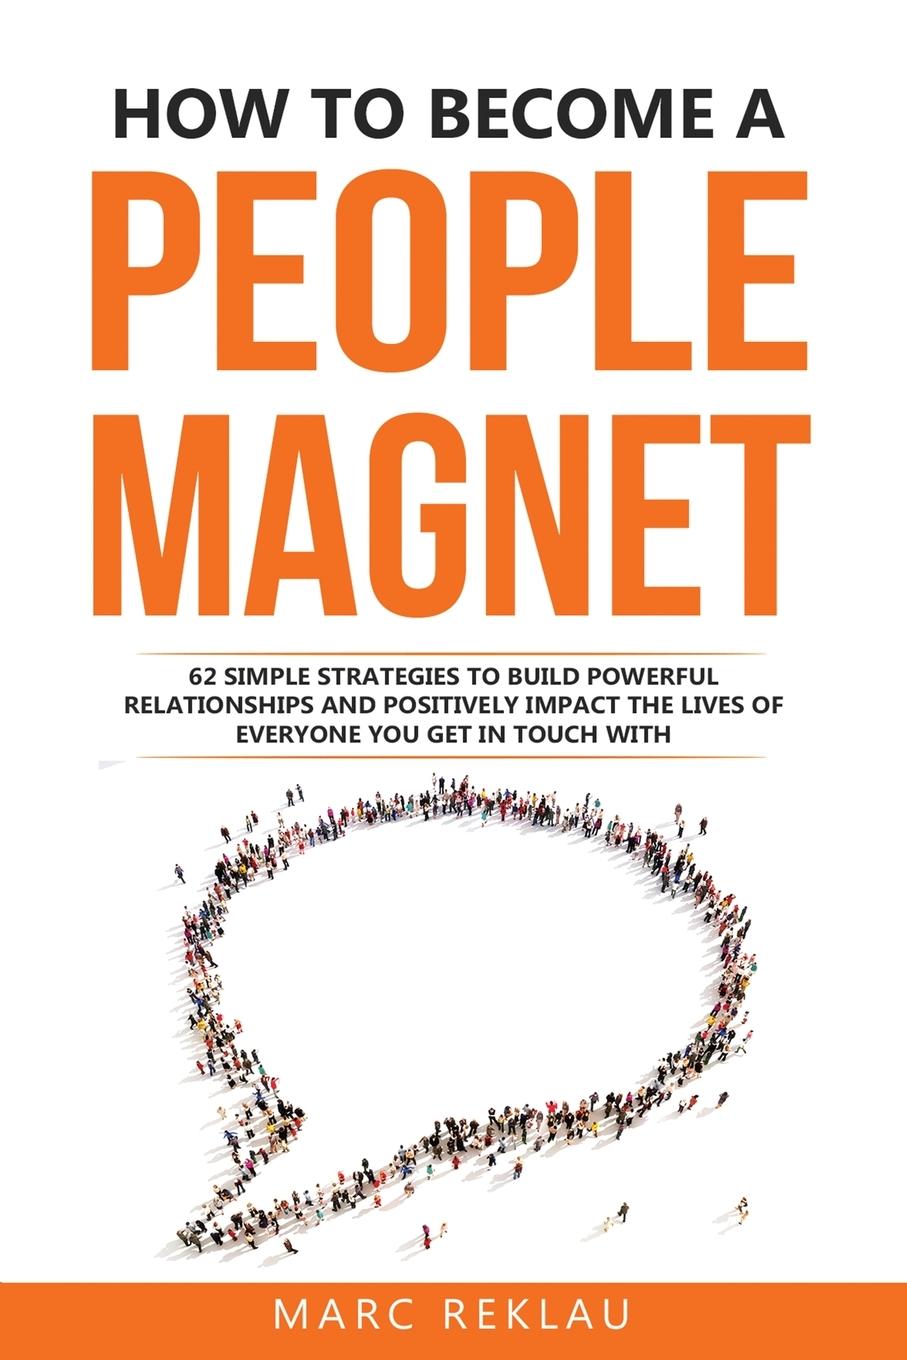 Book How to Become a People Magnet Marc Reklau